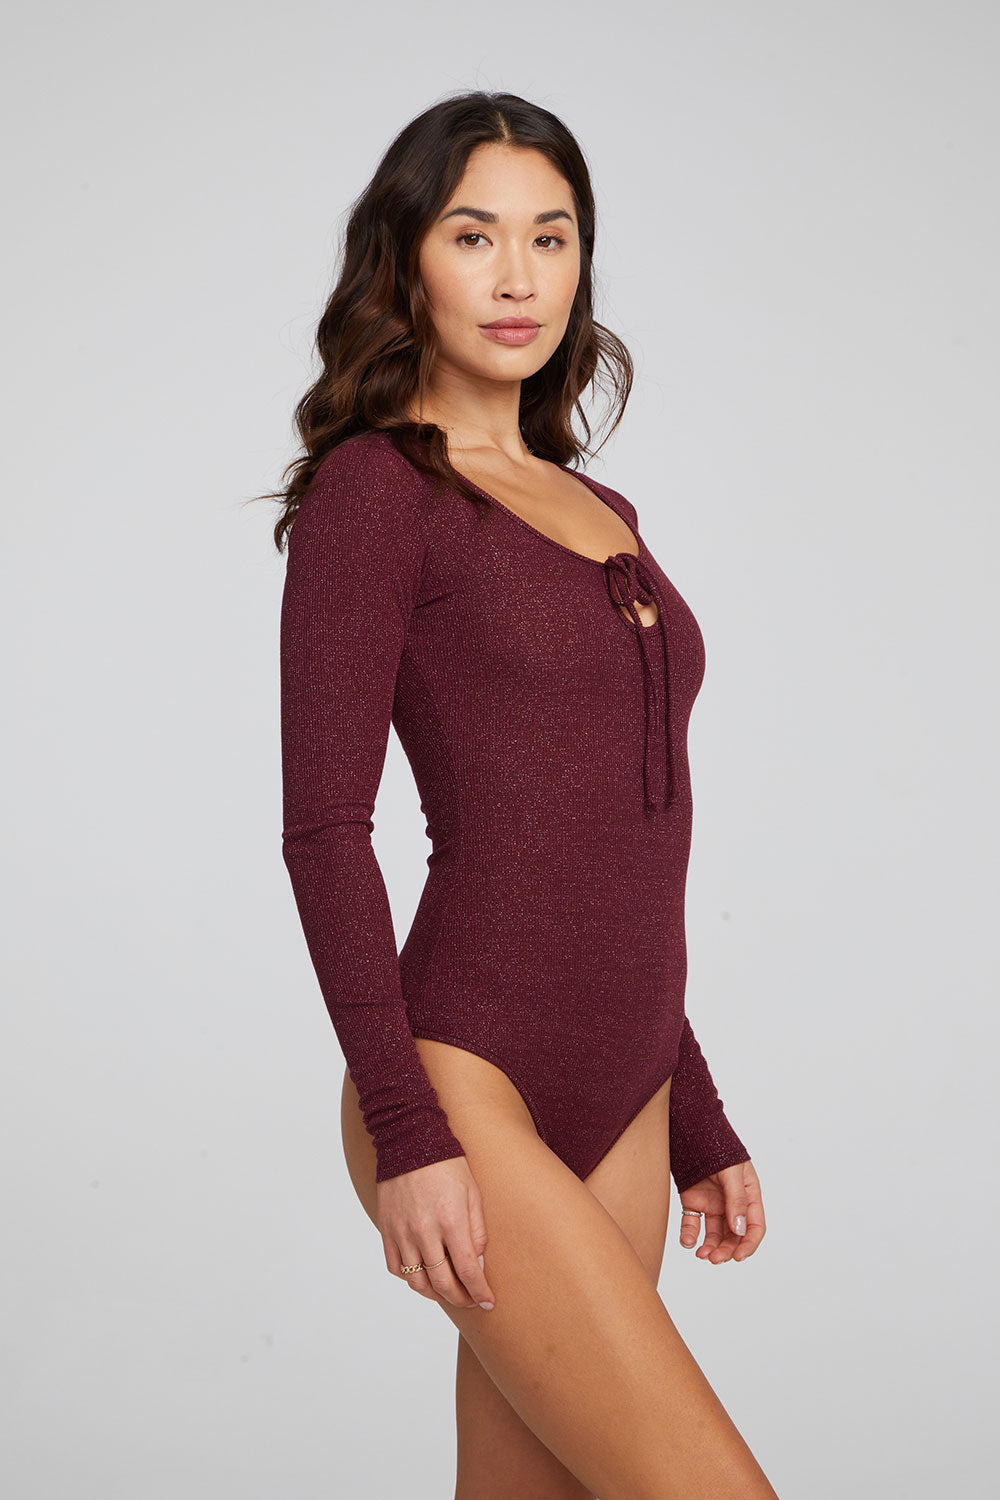 Spelly Wine Red Bodysuit WOMENS chaserbrand